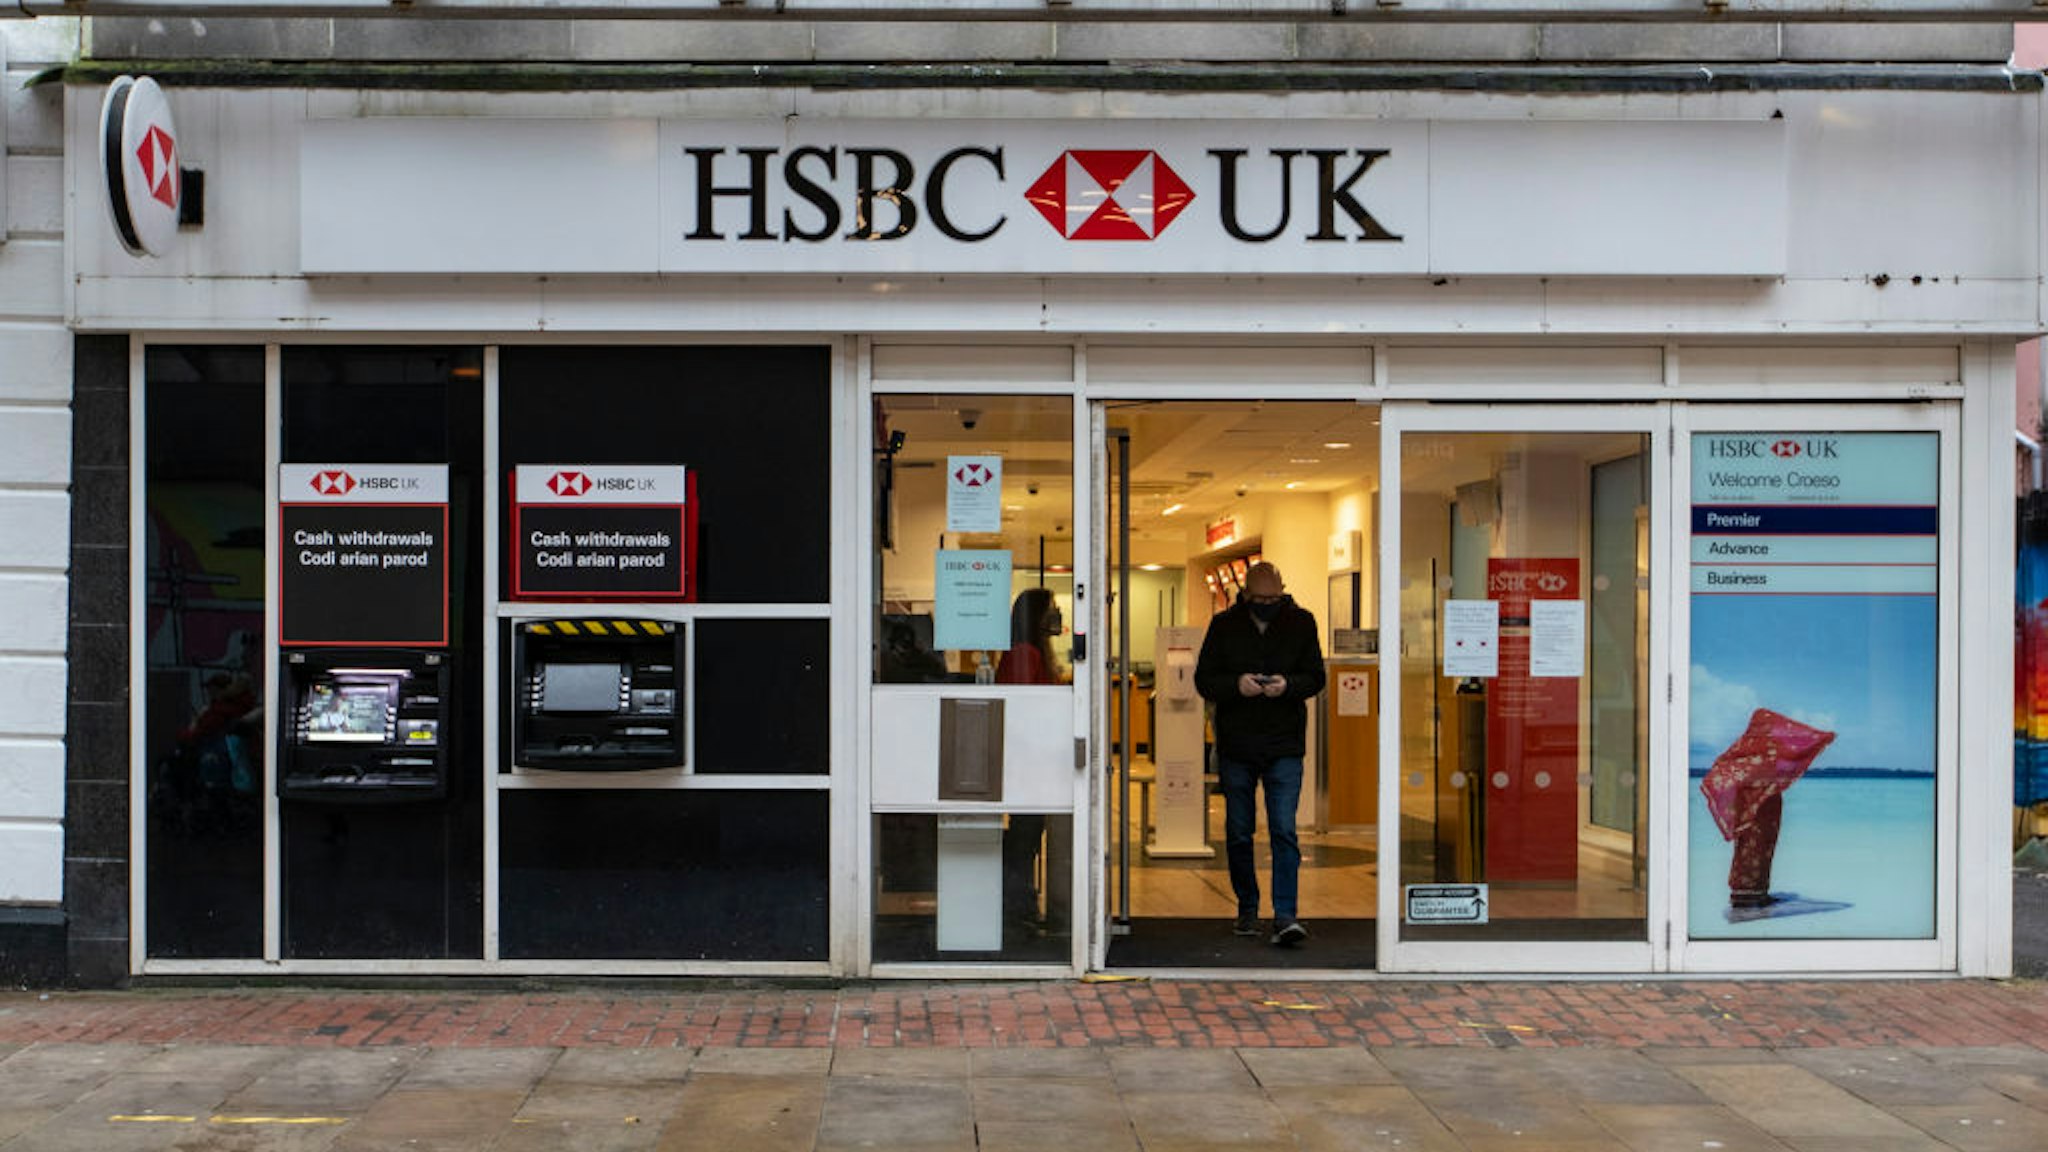 A man wearing a face mask walks out of the HSBC UK bank.